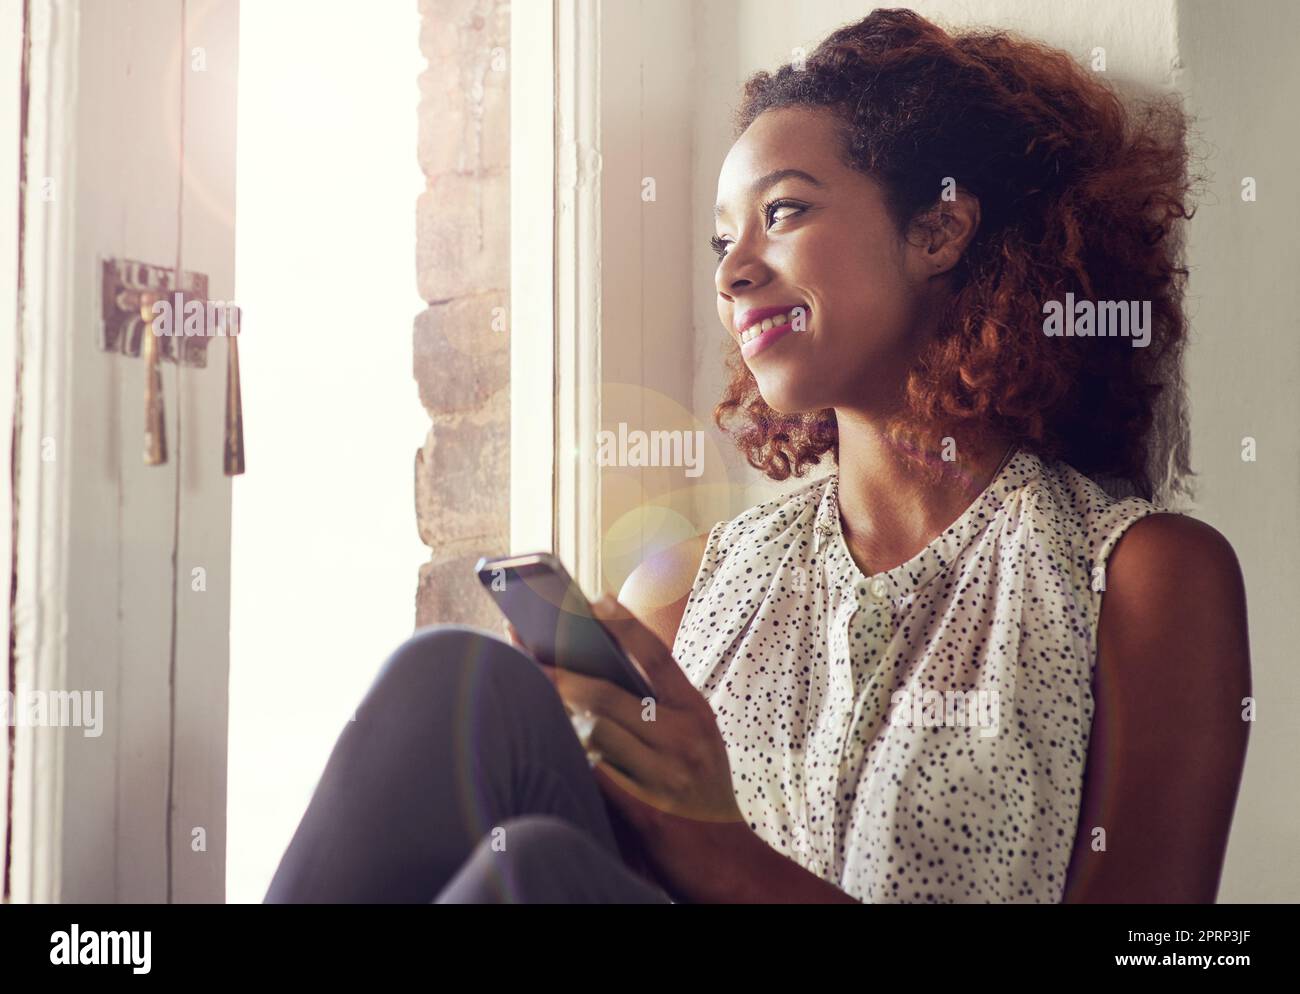 Those texts that make you feel loved...a young woman using her cellphone while sitting by a window. Stock Photo